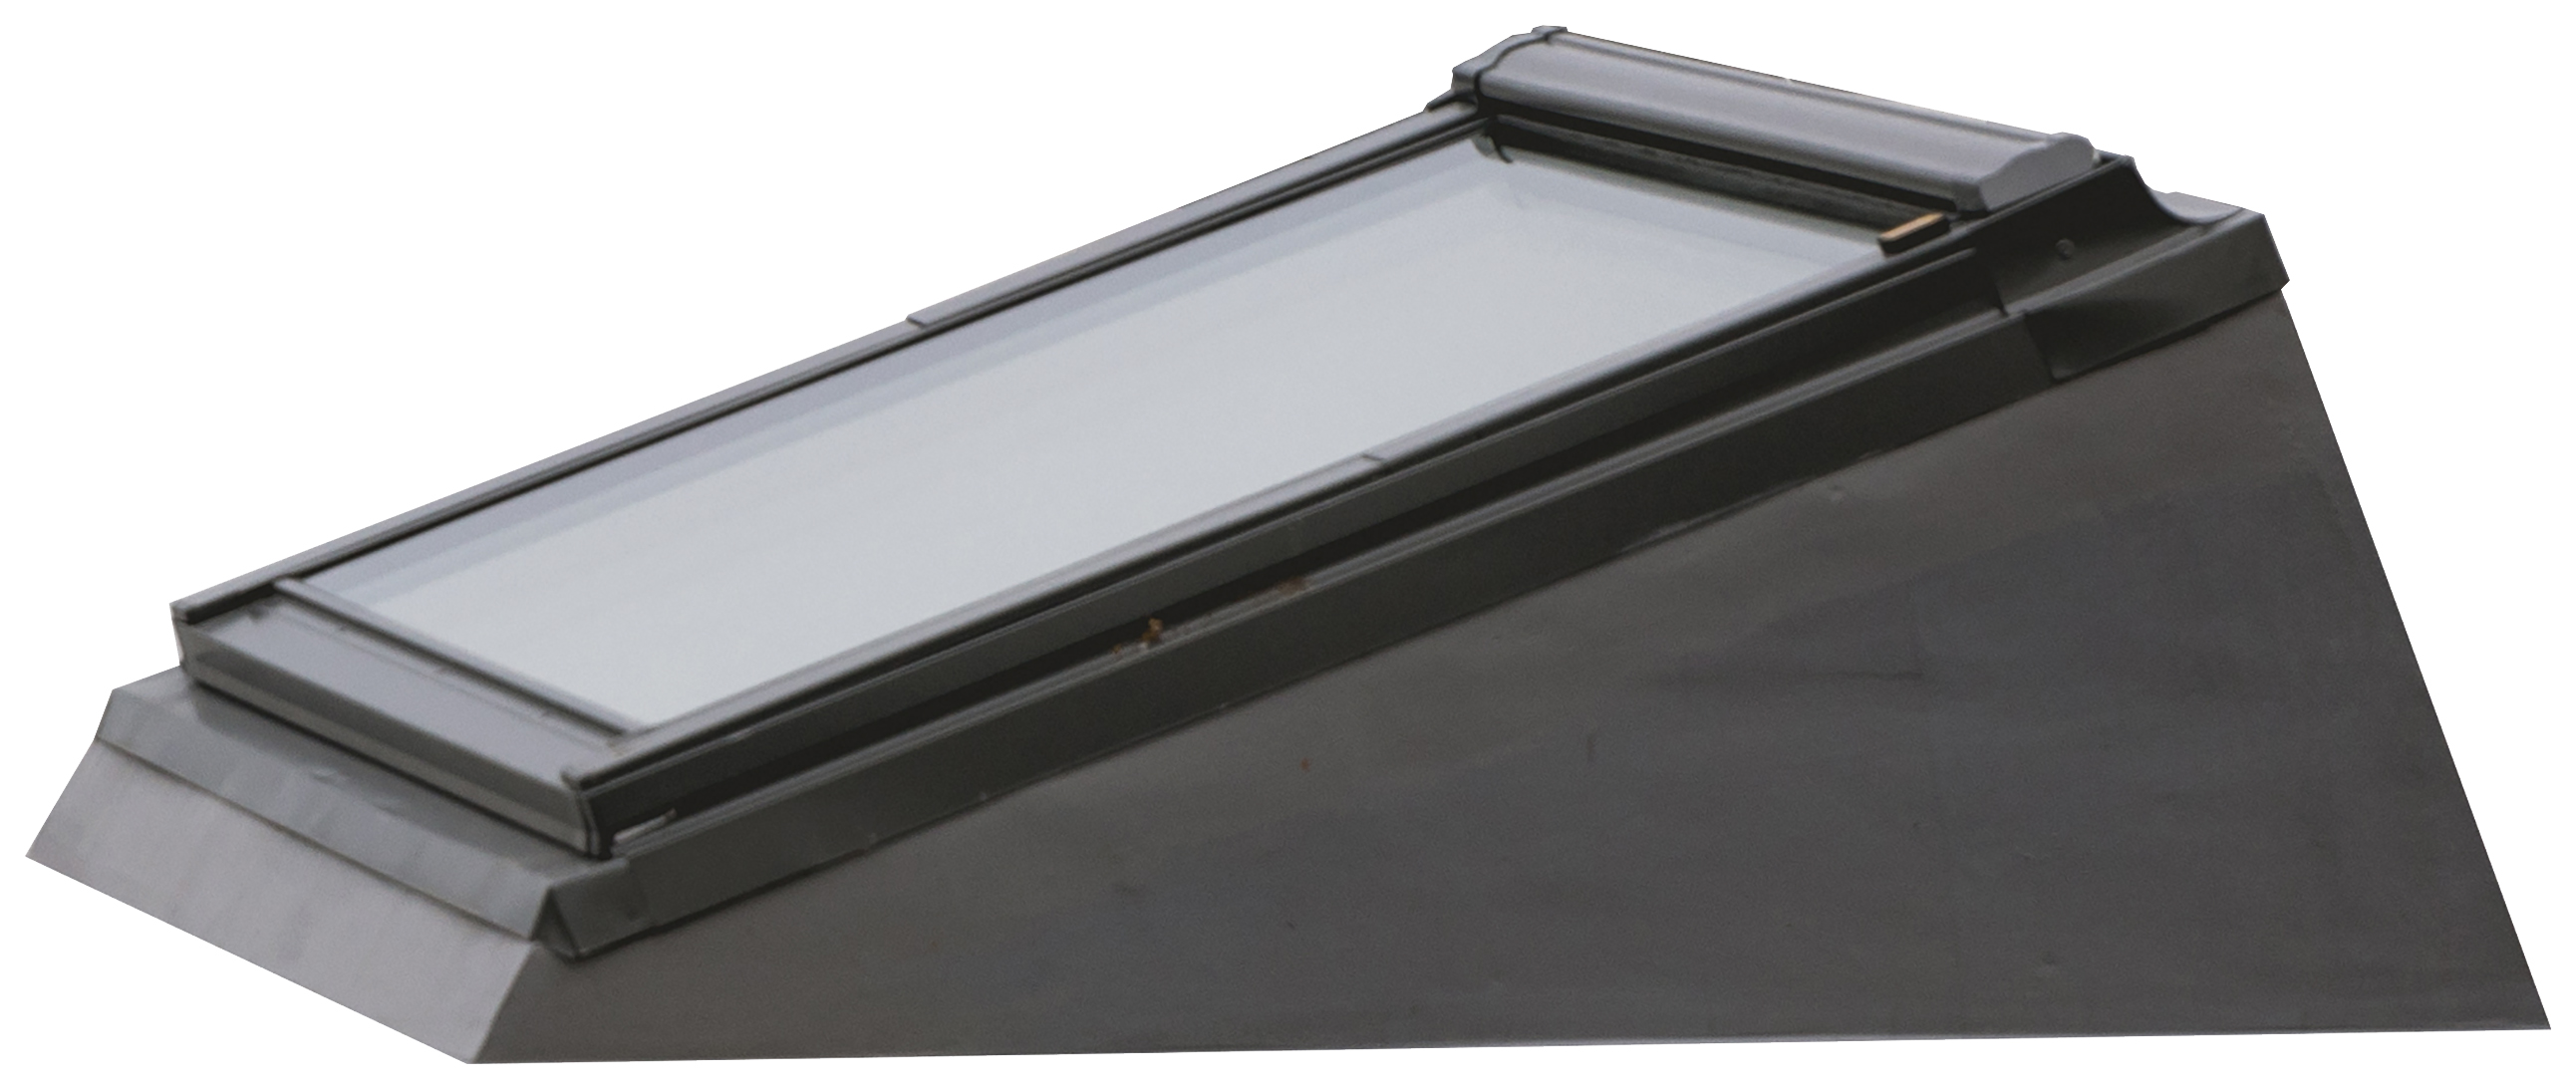 Image of Keylite FRS 03 Flat Roof System - 660 X 1180mm